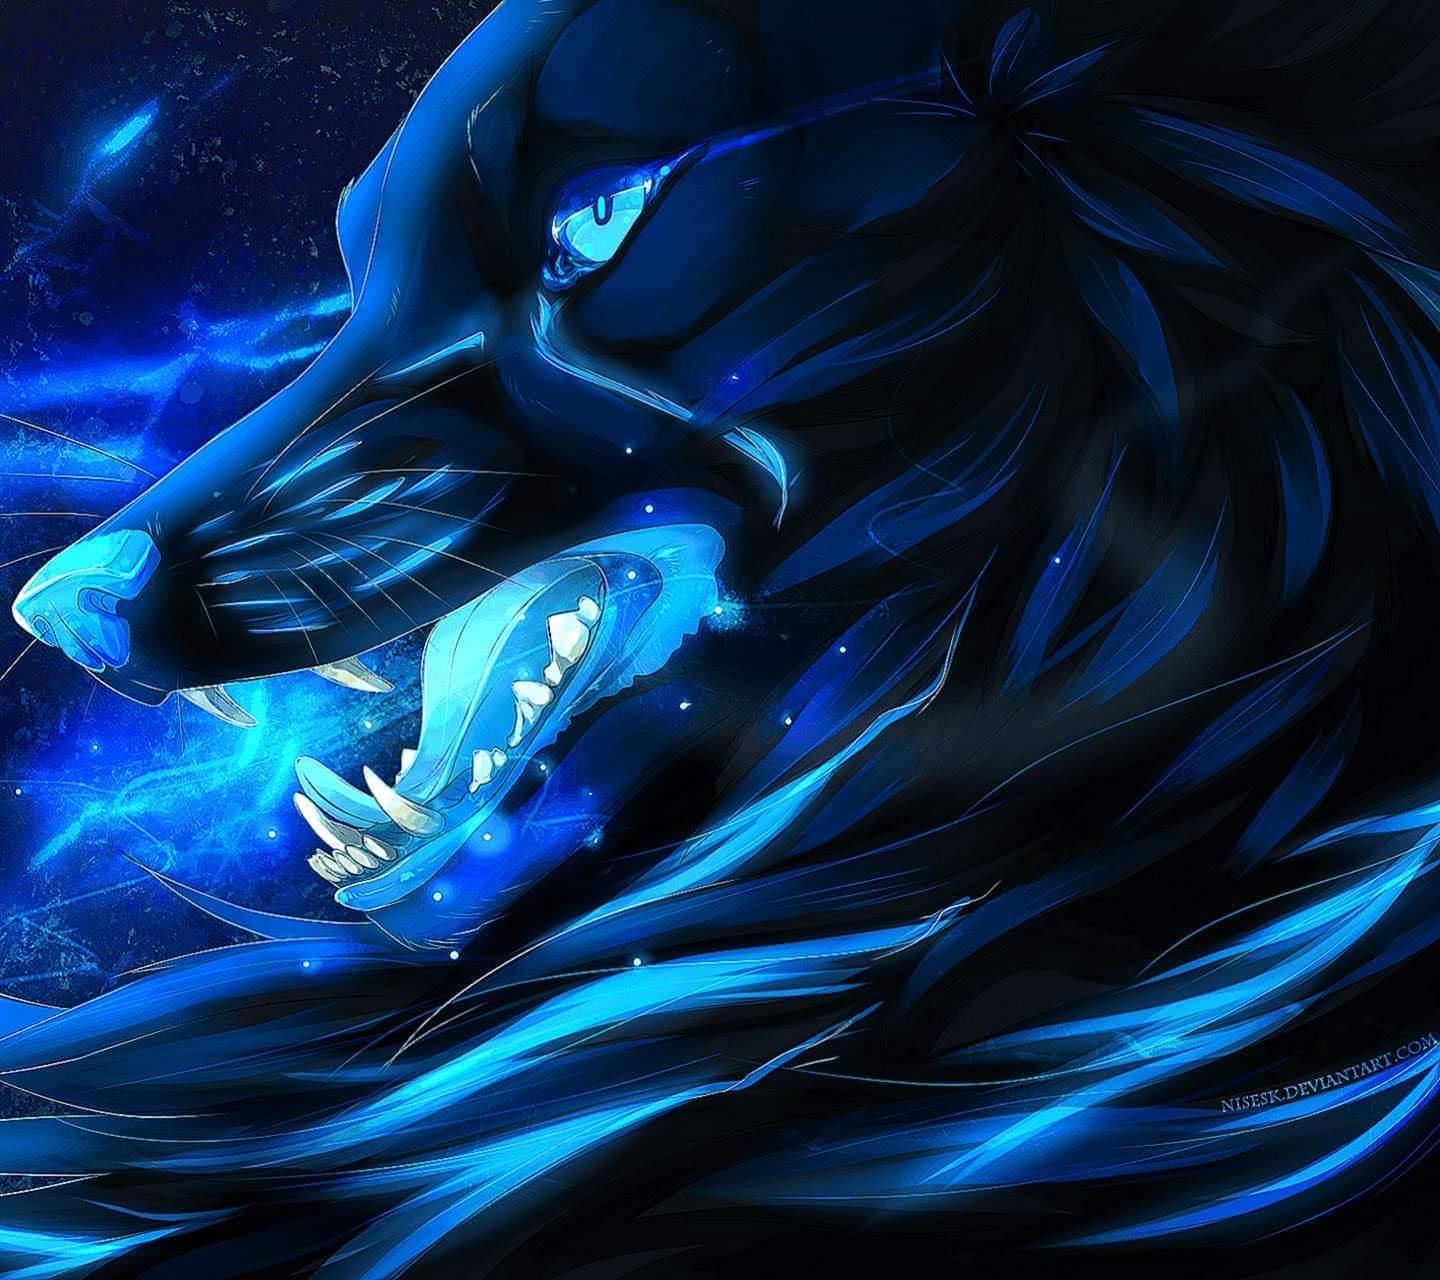 Galaxy Wolf Wallpapers